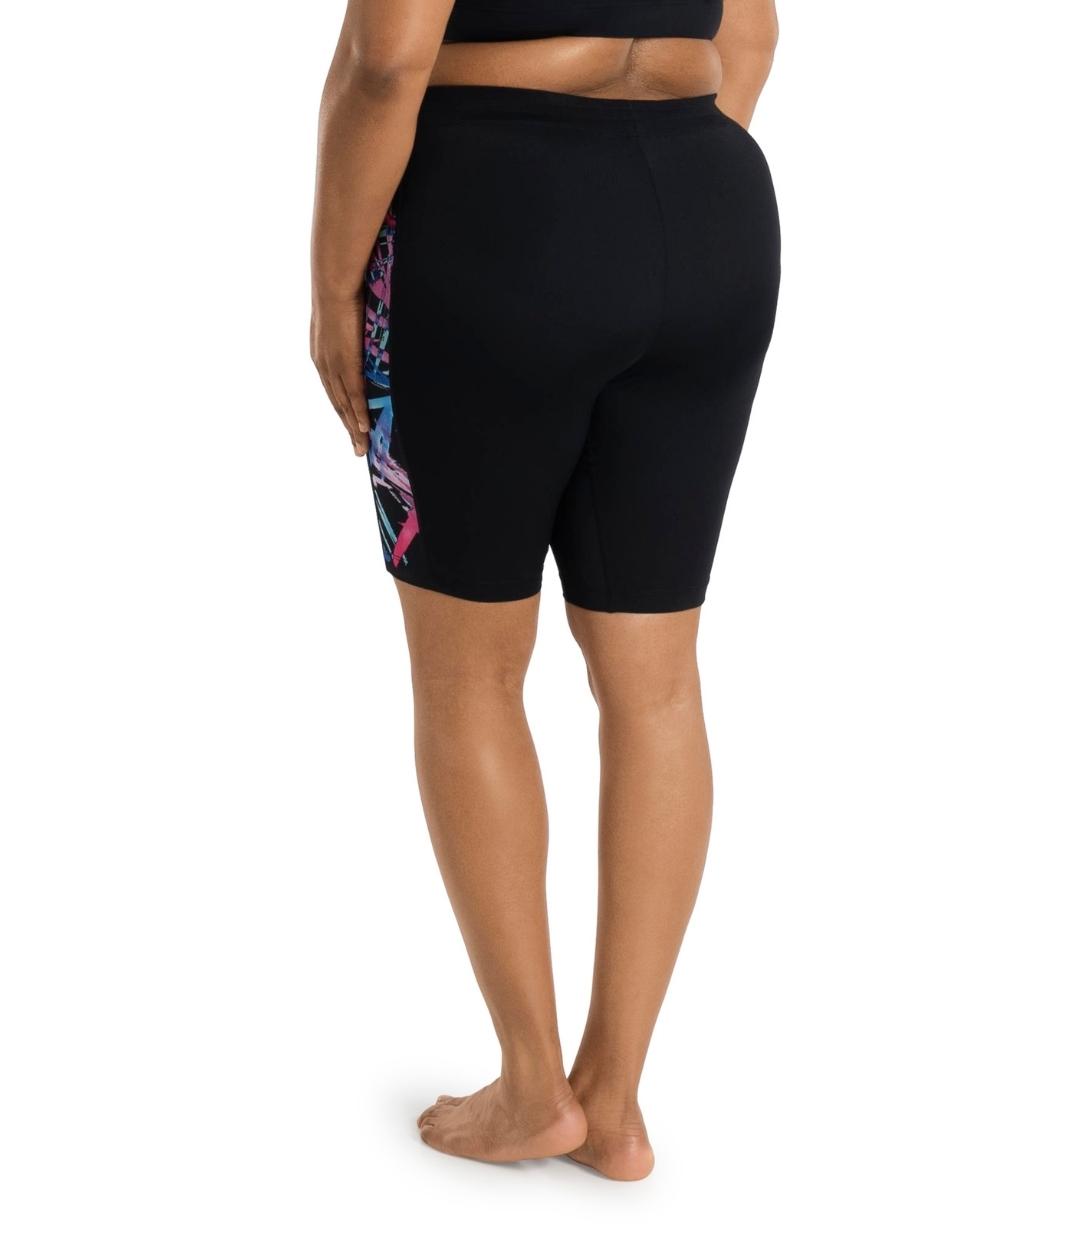 Bottom half of plus sized woman, back view, wearing JunoActive AquaSport Long Fitted Swim Shorts Sunset Palms Print Black.The shorts have pink, blue and teal abstract line print colorblock accent on the side of the leg. 